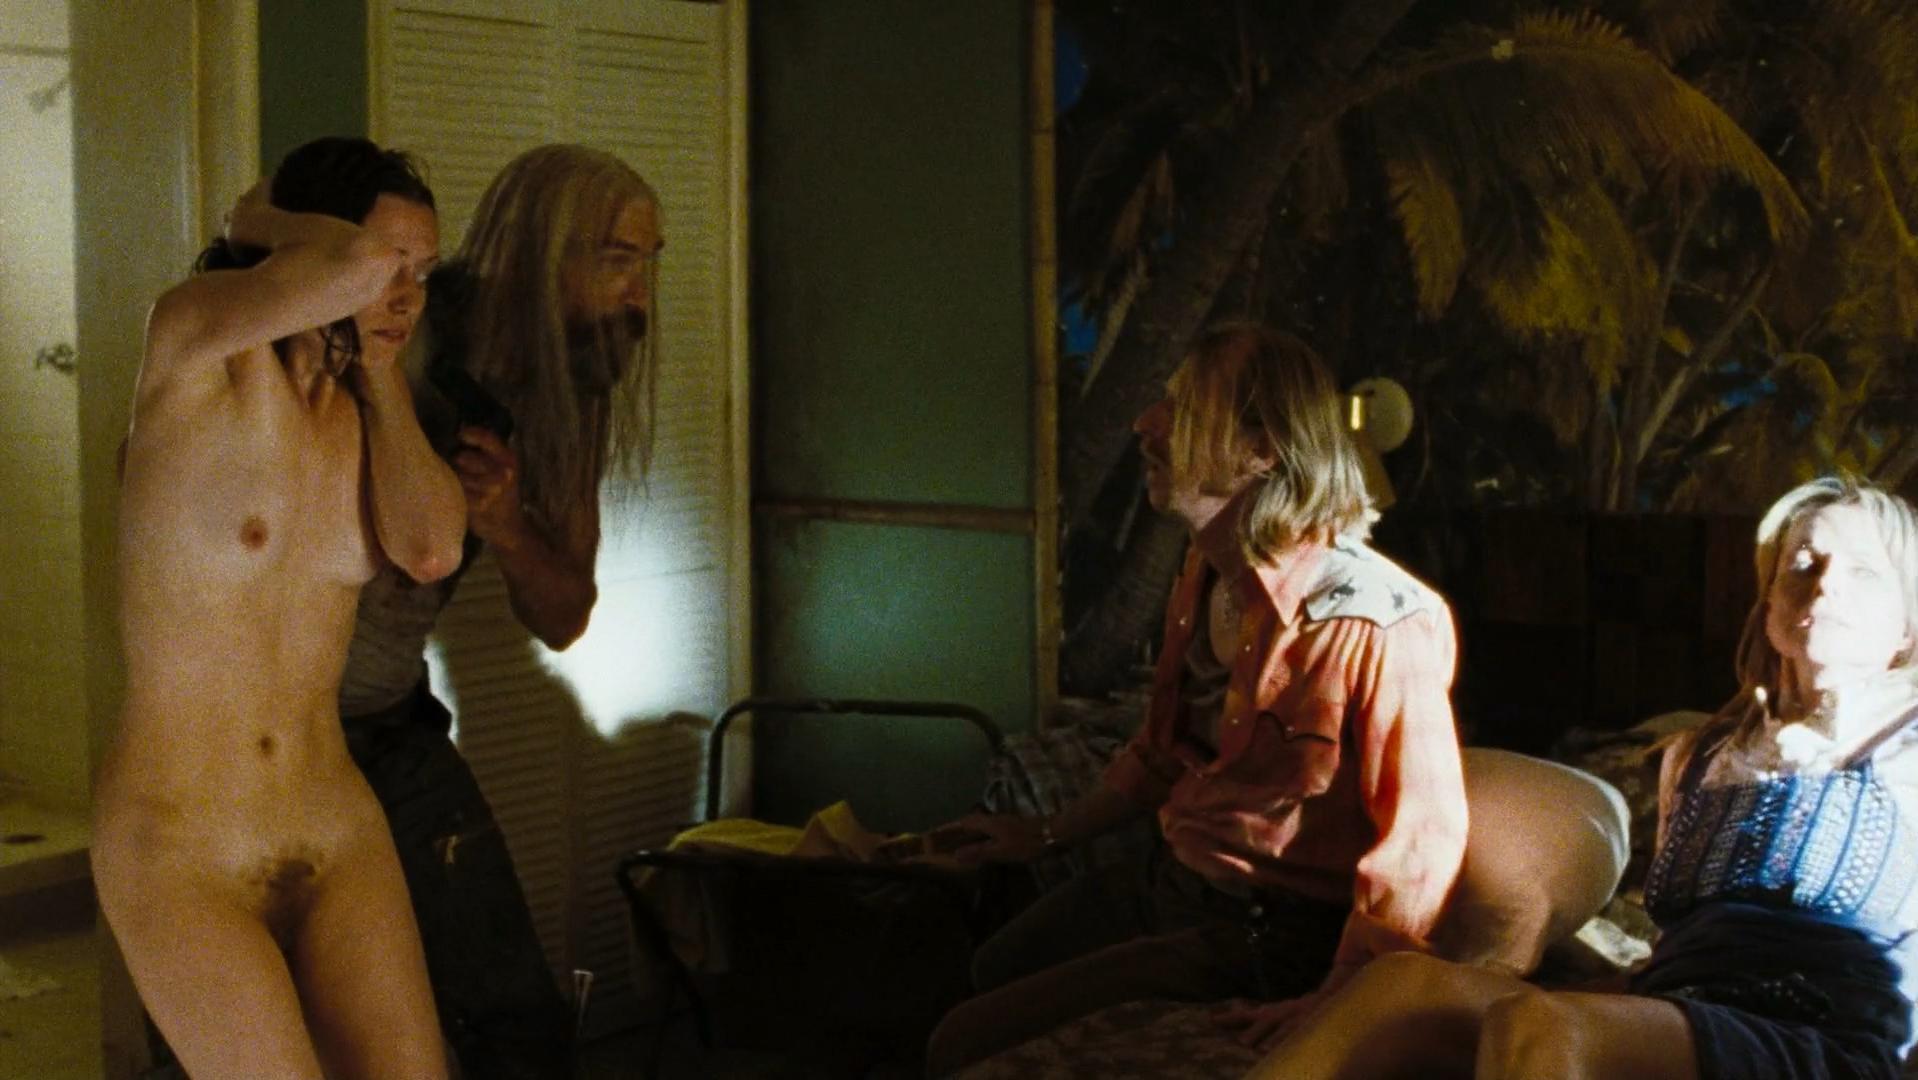 Kate Norby nude, Sheri Moon Zombie nude - The Devil's Rejects (2005)